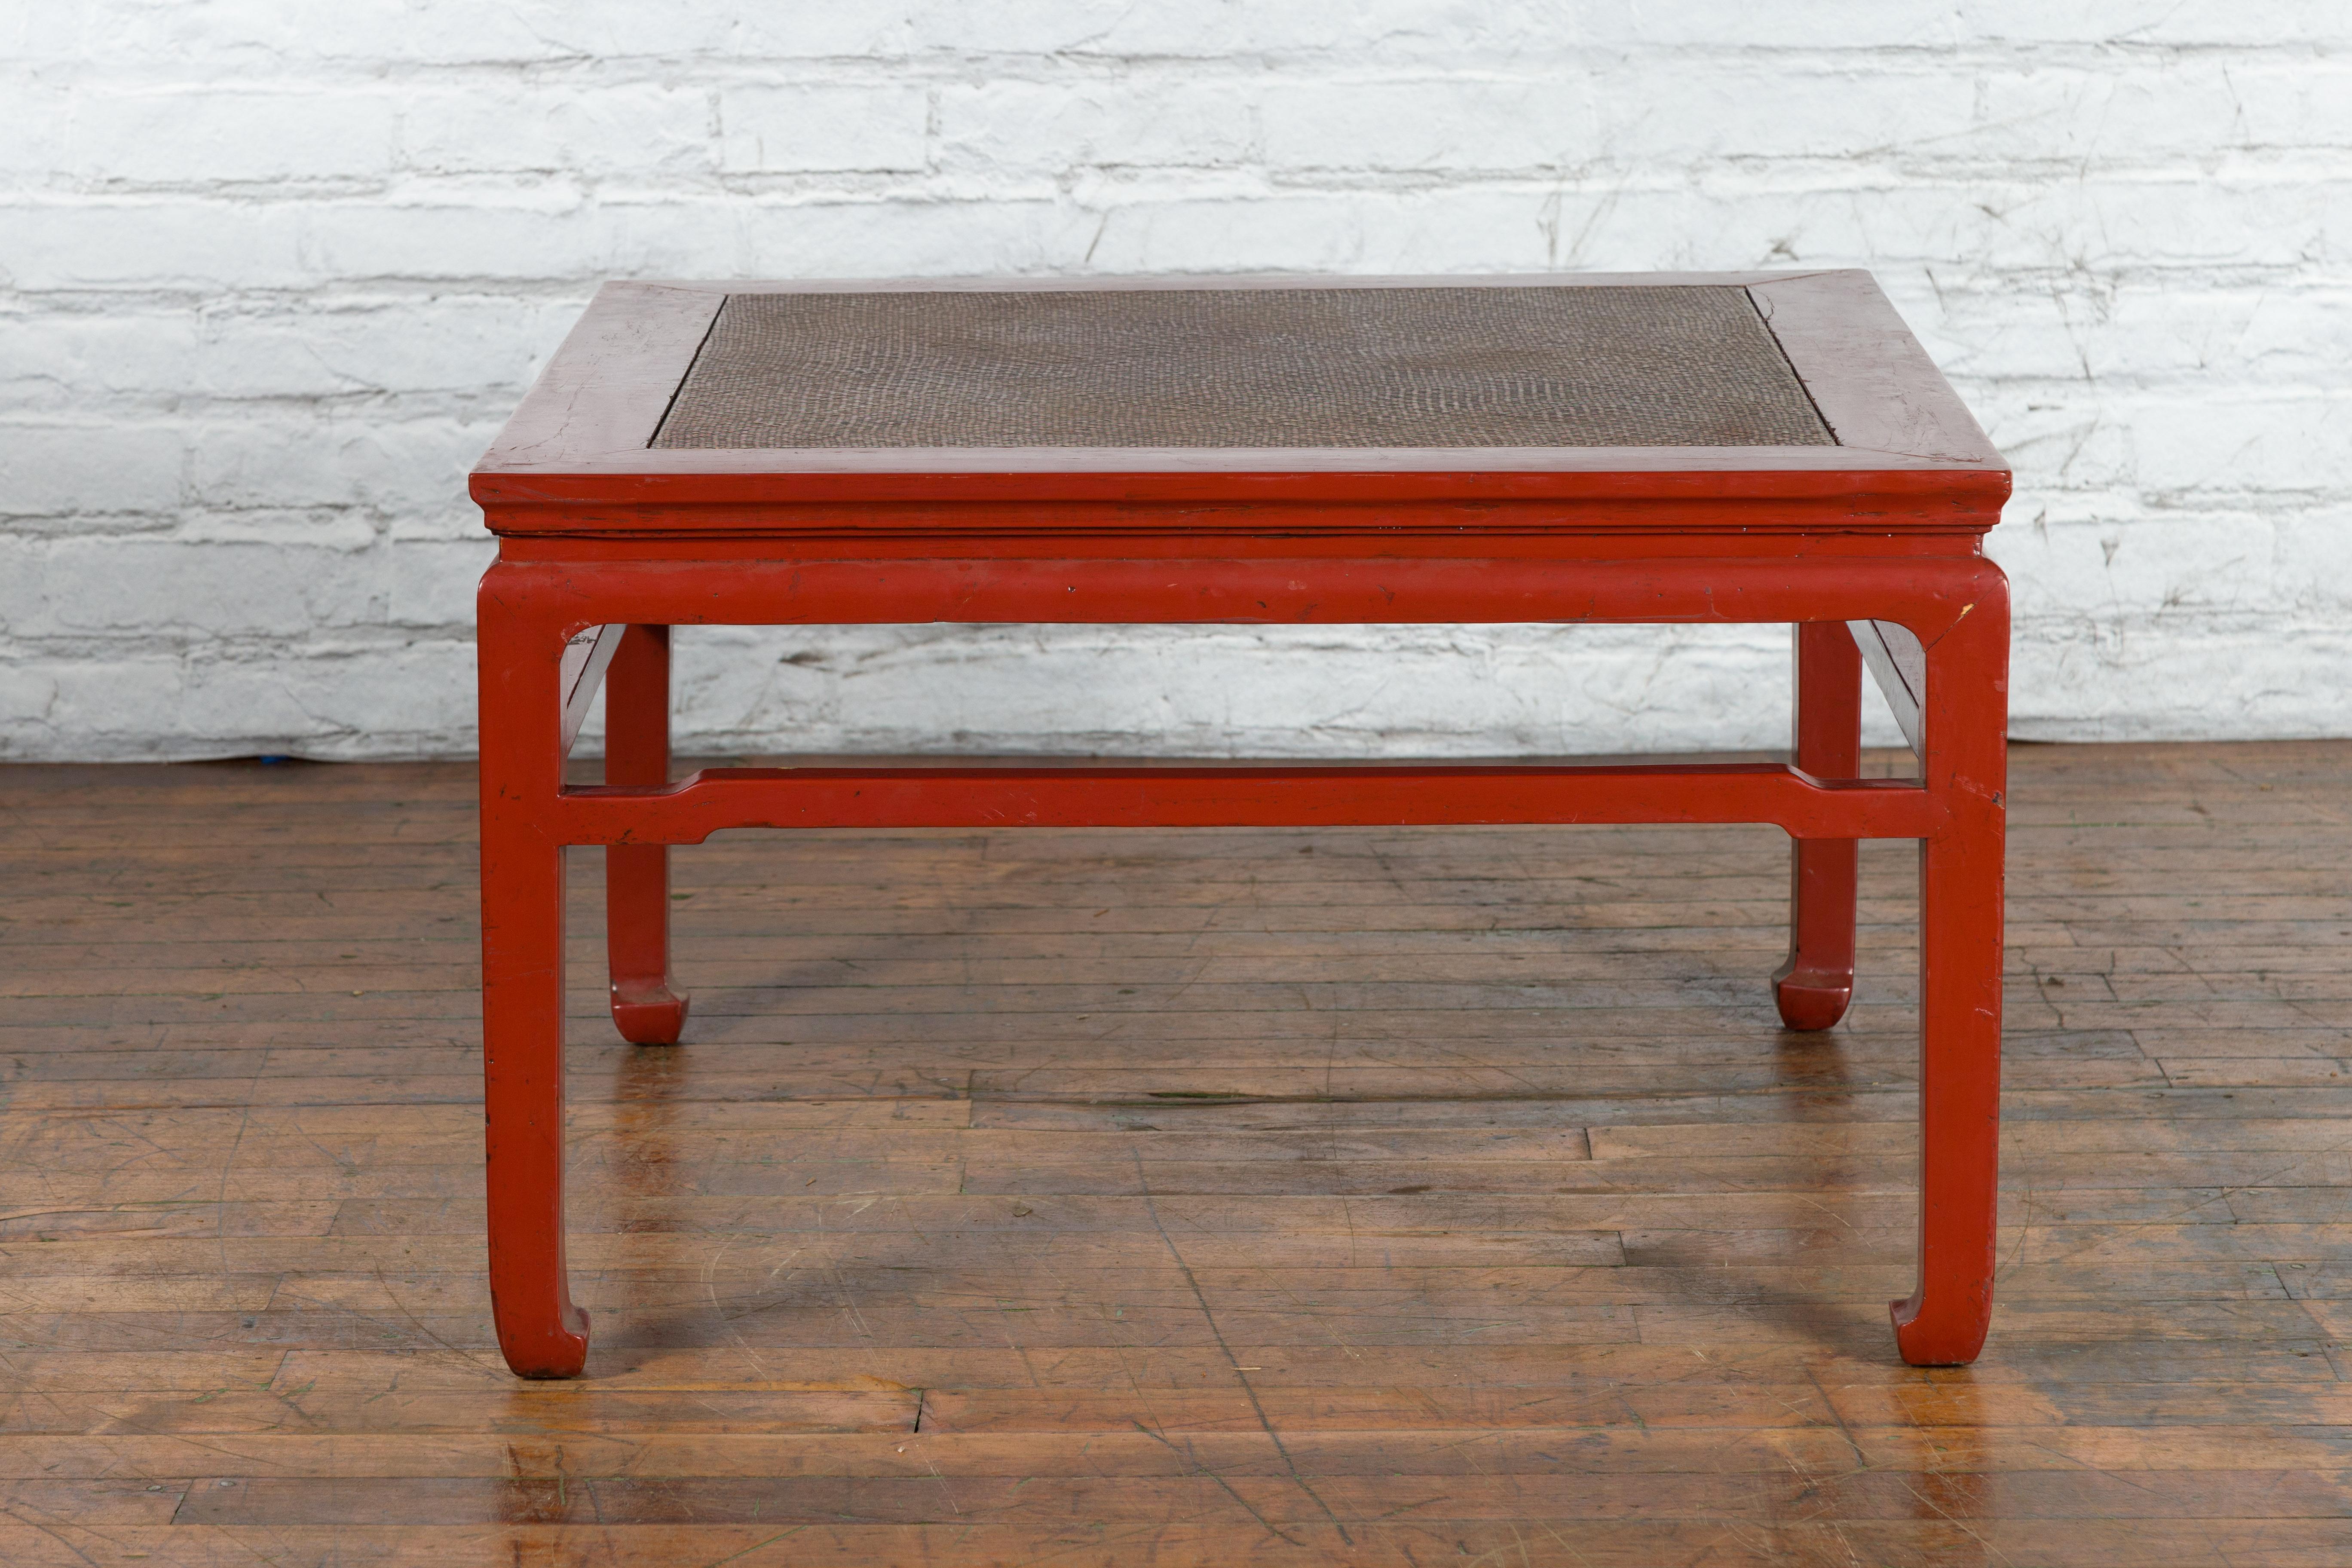 Chinese Early 20th Century Red Lacquer Coffee Table with Hand-Woven Rattan Top For Sale 8